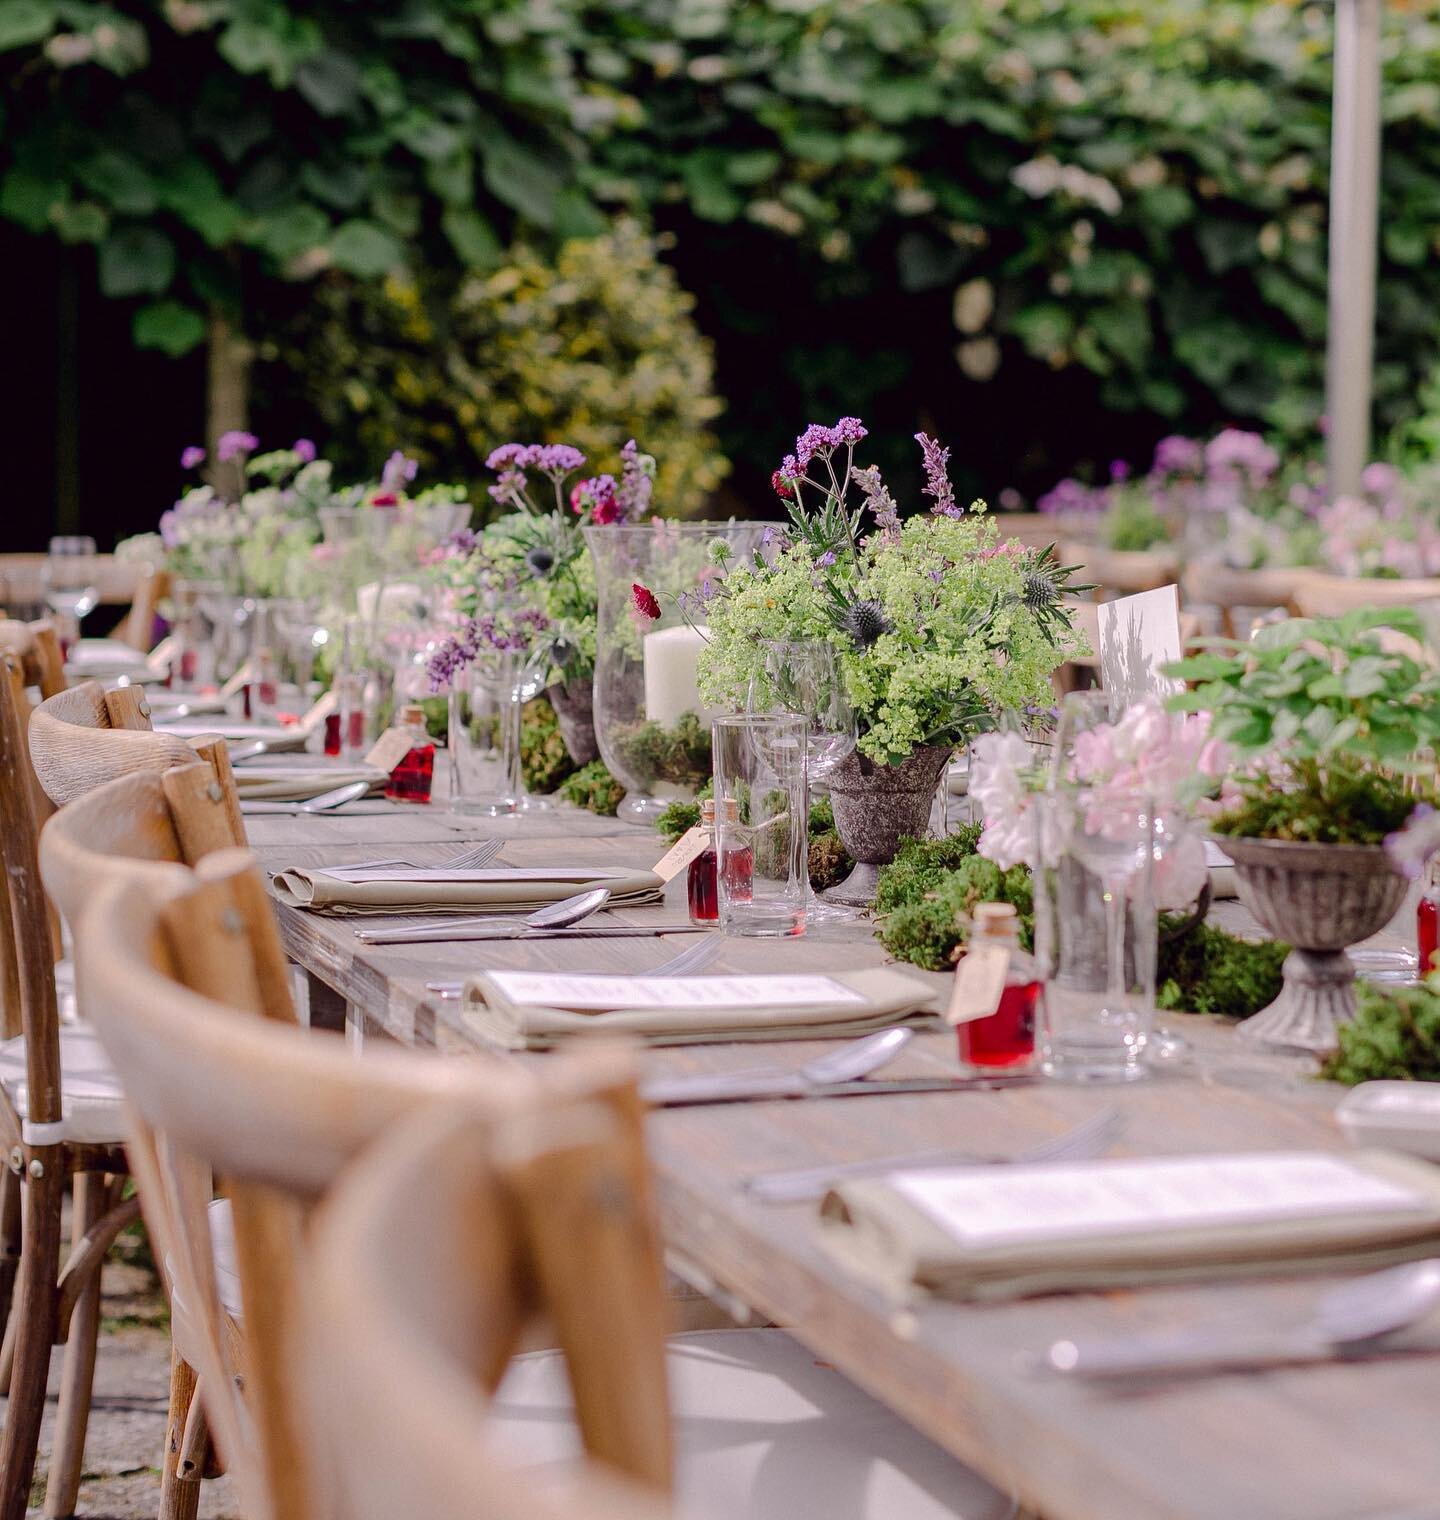 🌿Outdoor dining🌿

Alfresco dining in the hot summer months. Another big wedding trend for 2023. Fingers crossed for a hot summer! 

Recently engaged? Getting married? We&rsquo;d love to help you plan. Get in touch 📧 

📸 @bizzyarnottphotography 

